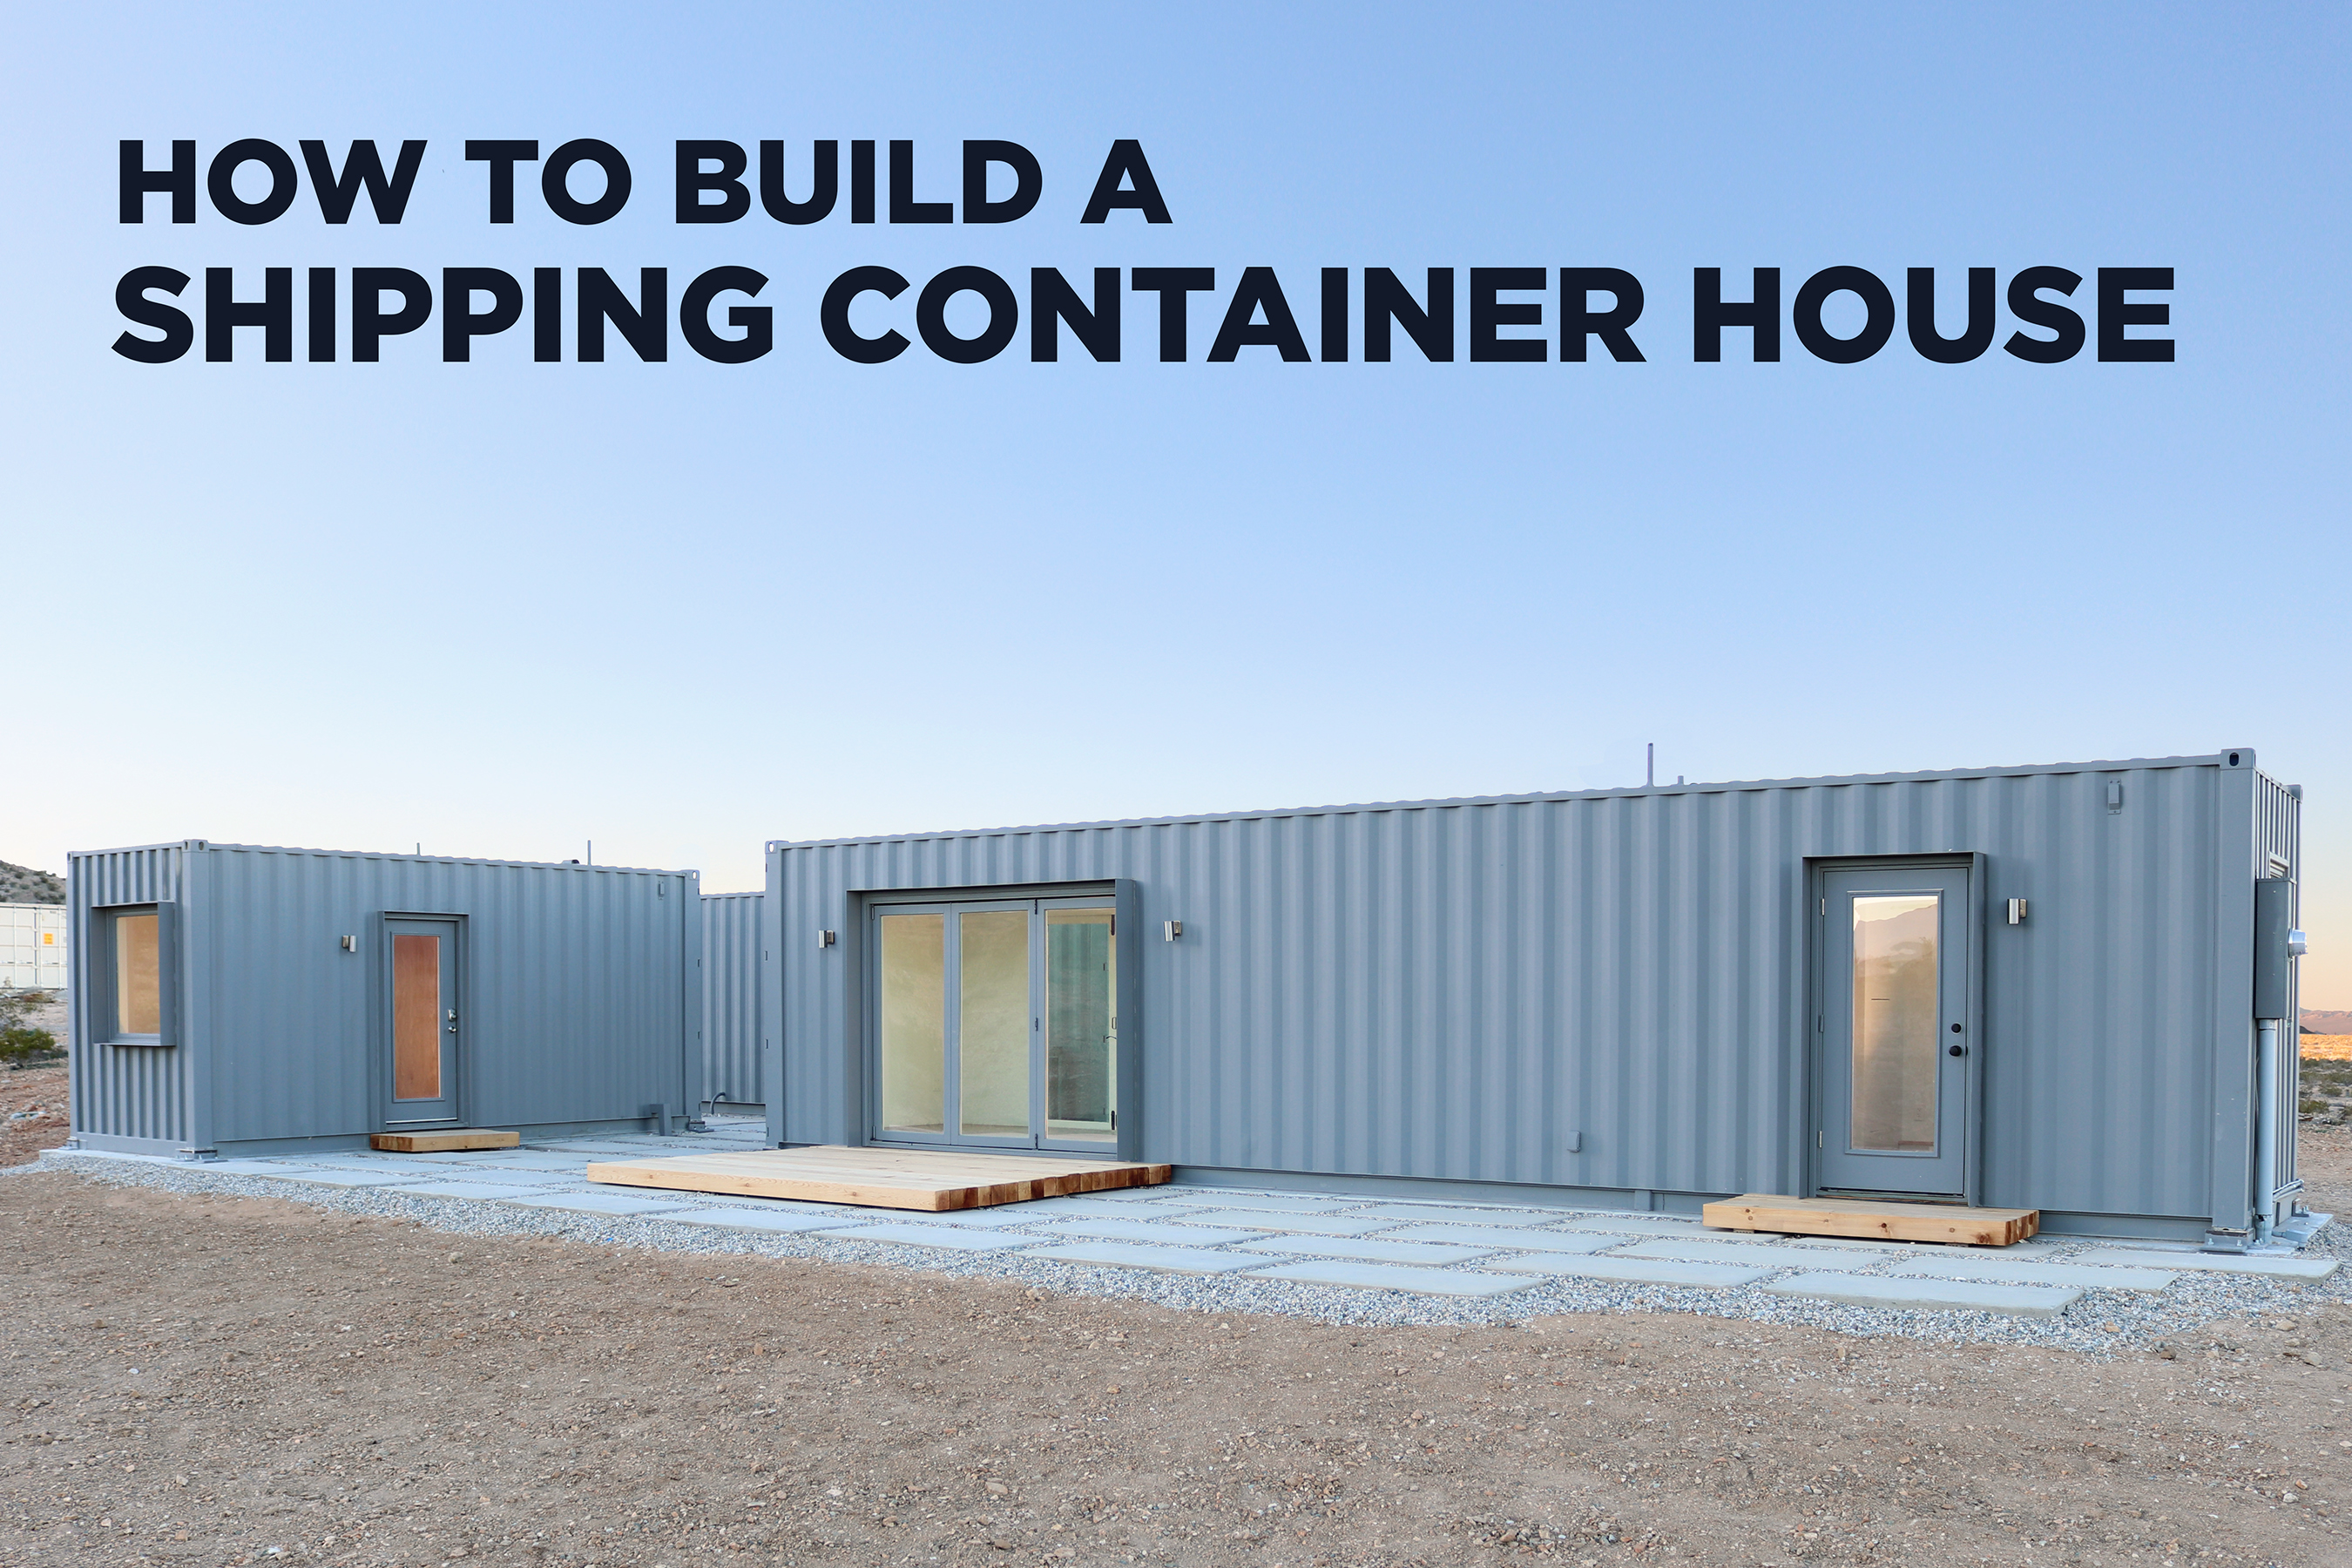 How to Make a Shipping Container House